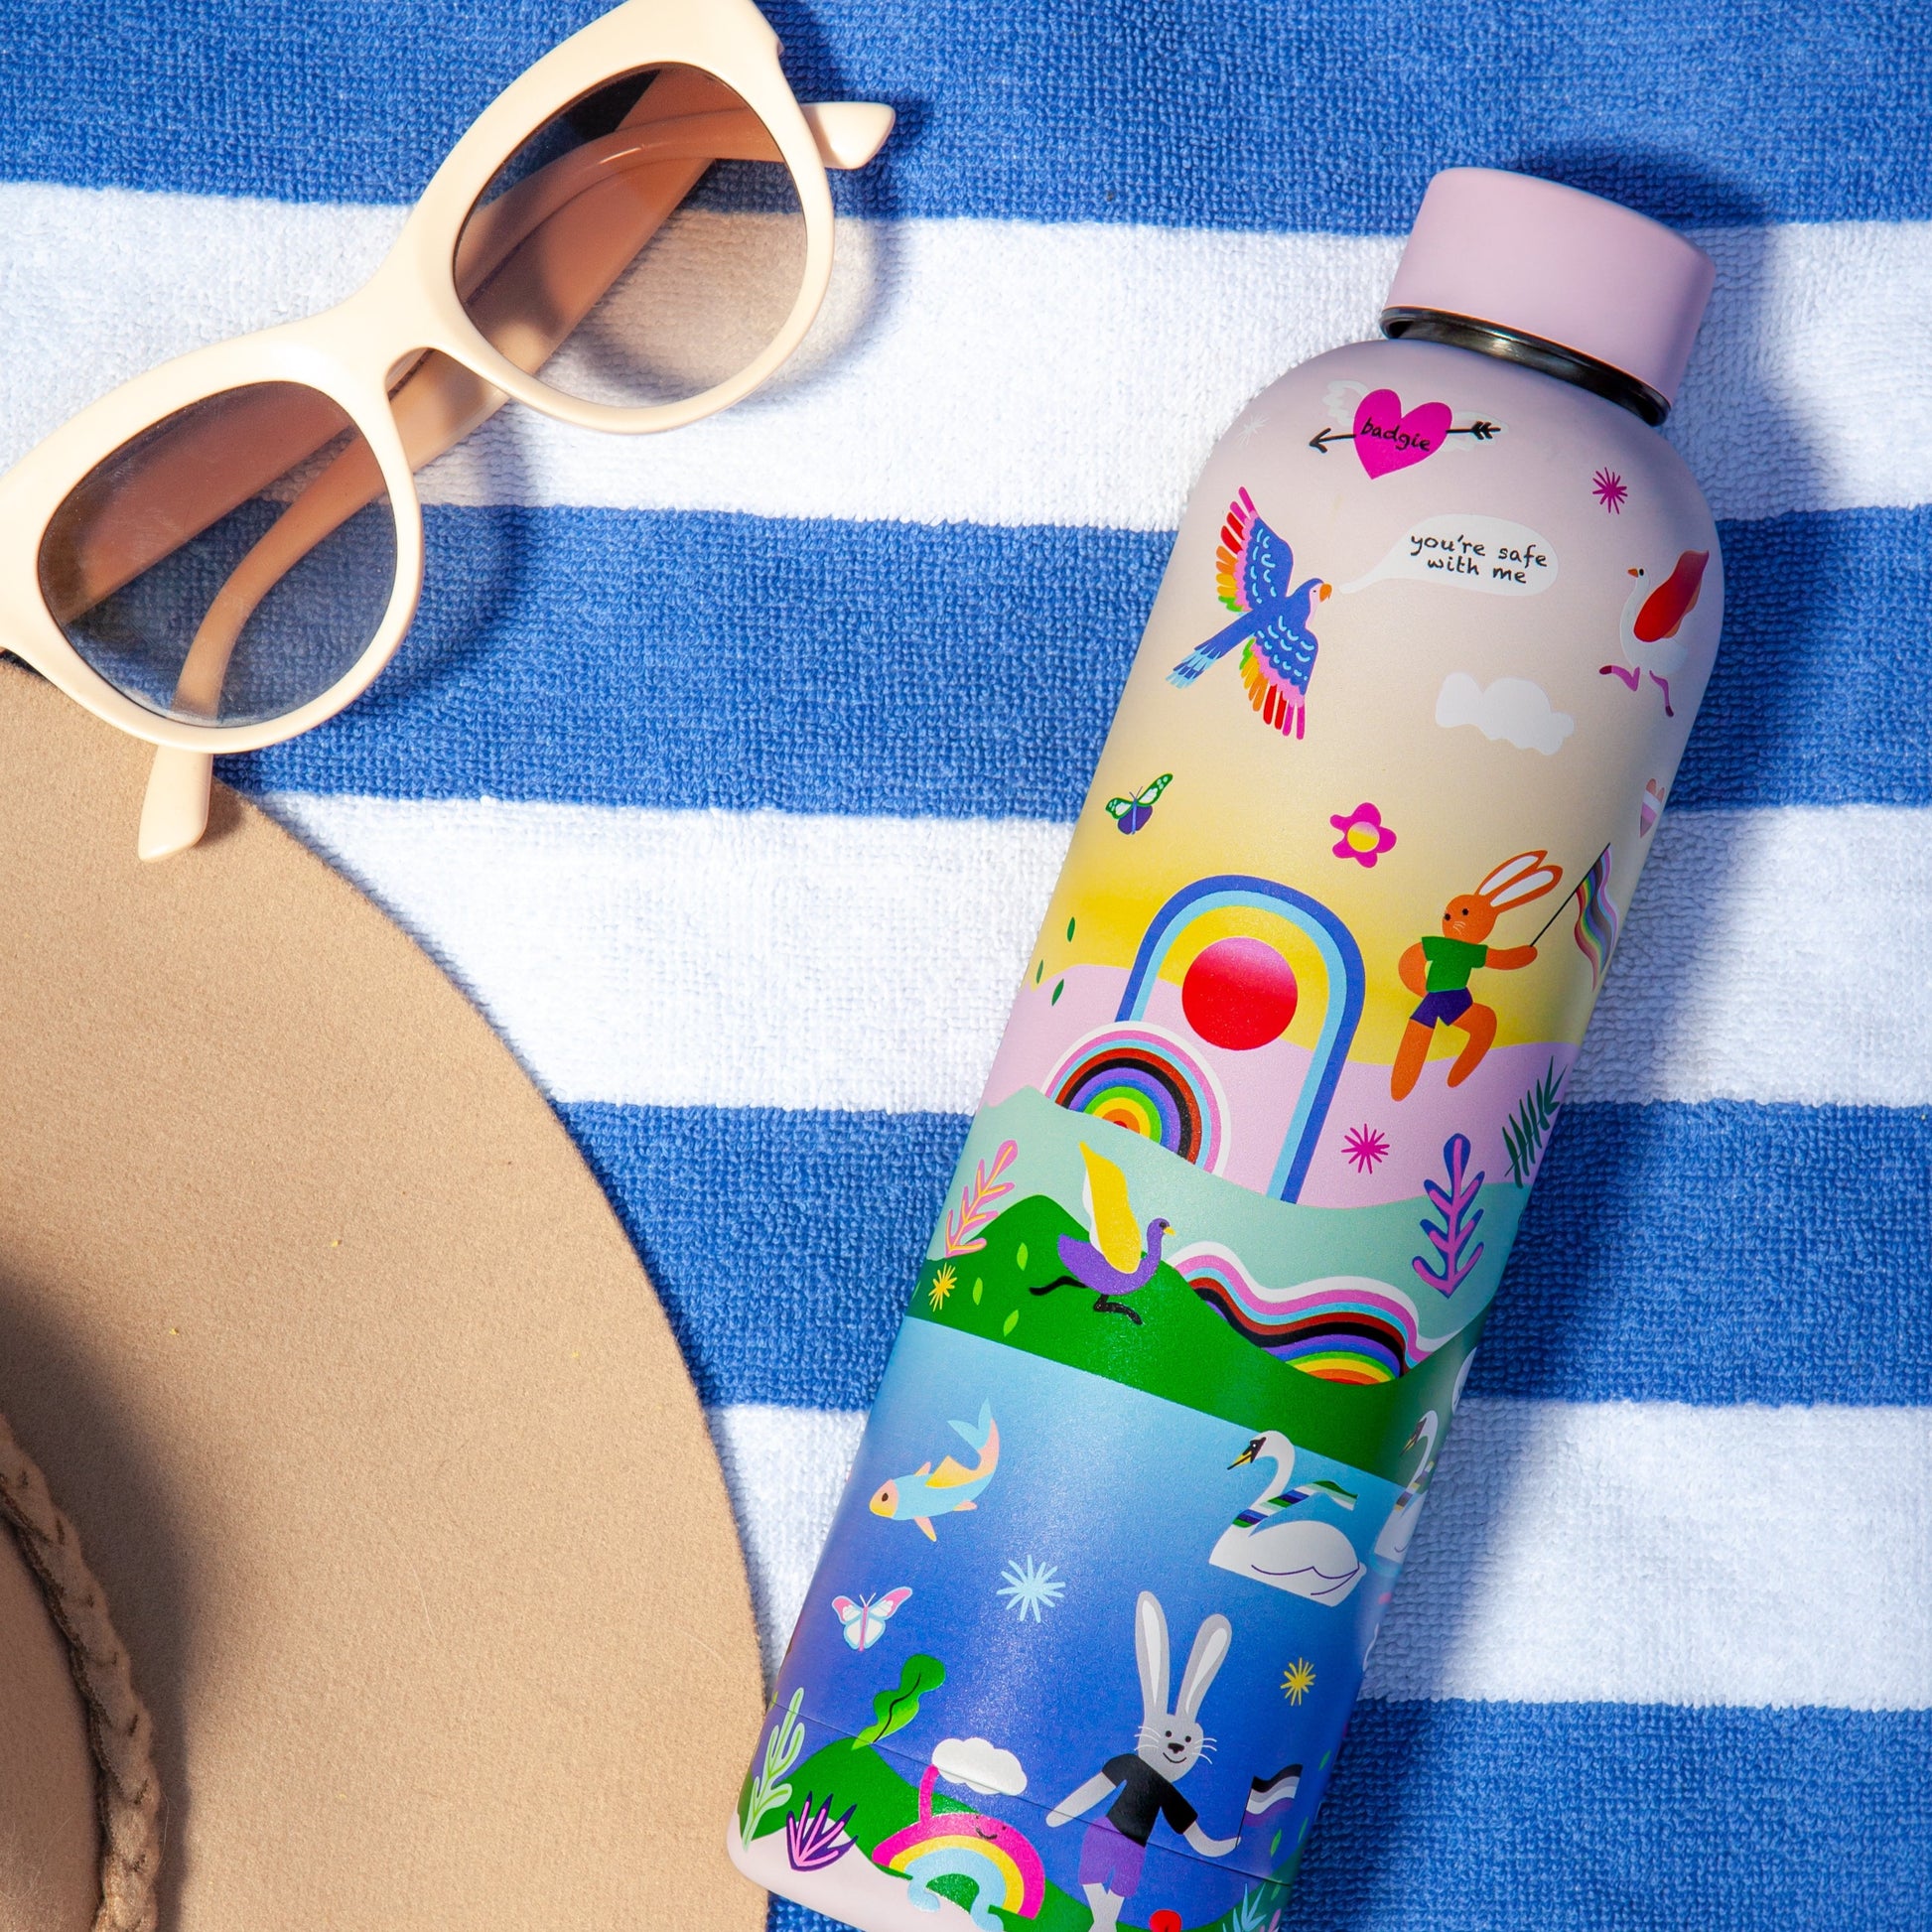 Badgie Be Yourself Steel Water Bottle BPAFree. Product image of the steel bottle at the beach, on a towel, used for travel and adventure, with sunglasses and hat visible